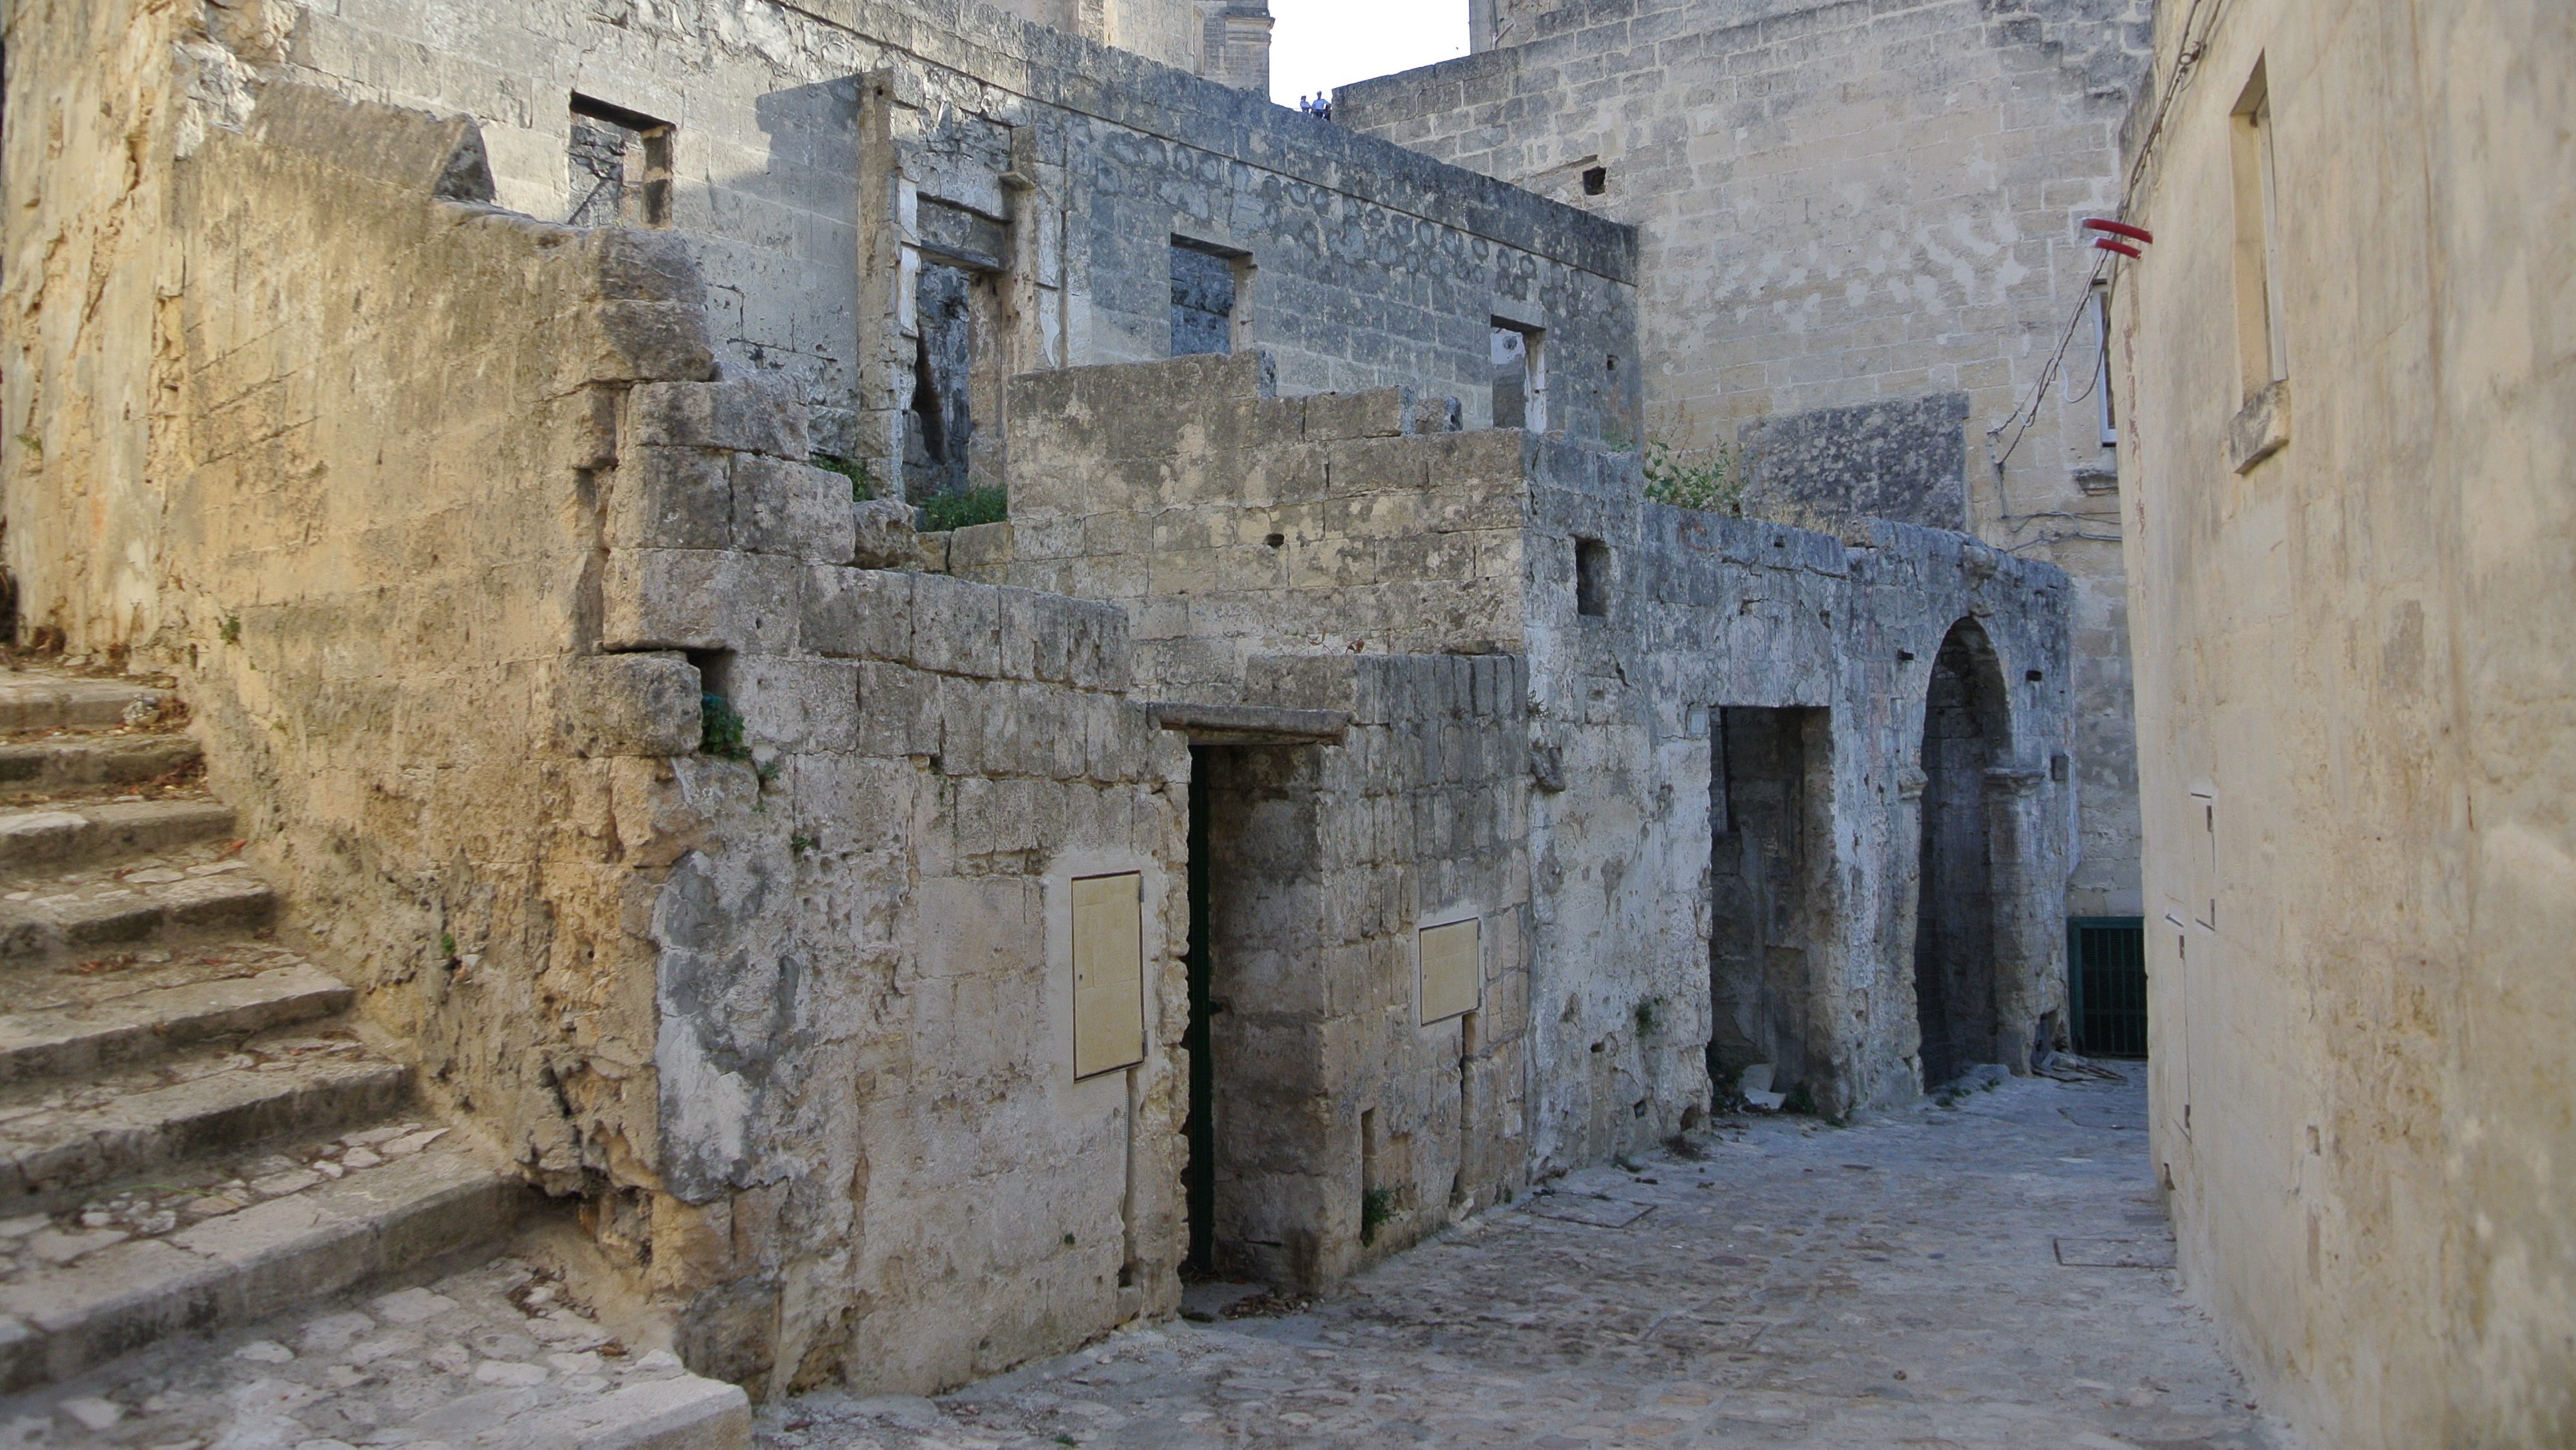 Houses in Matera, Italy